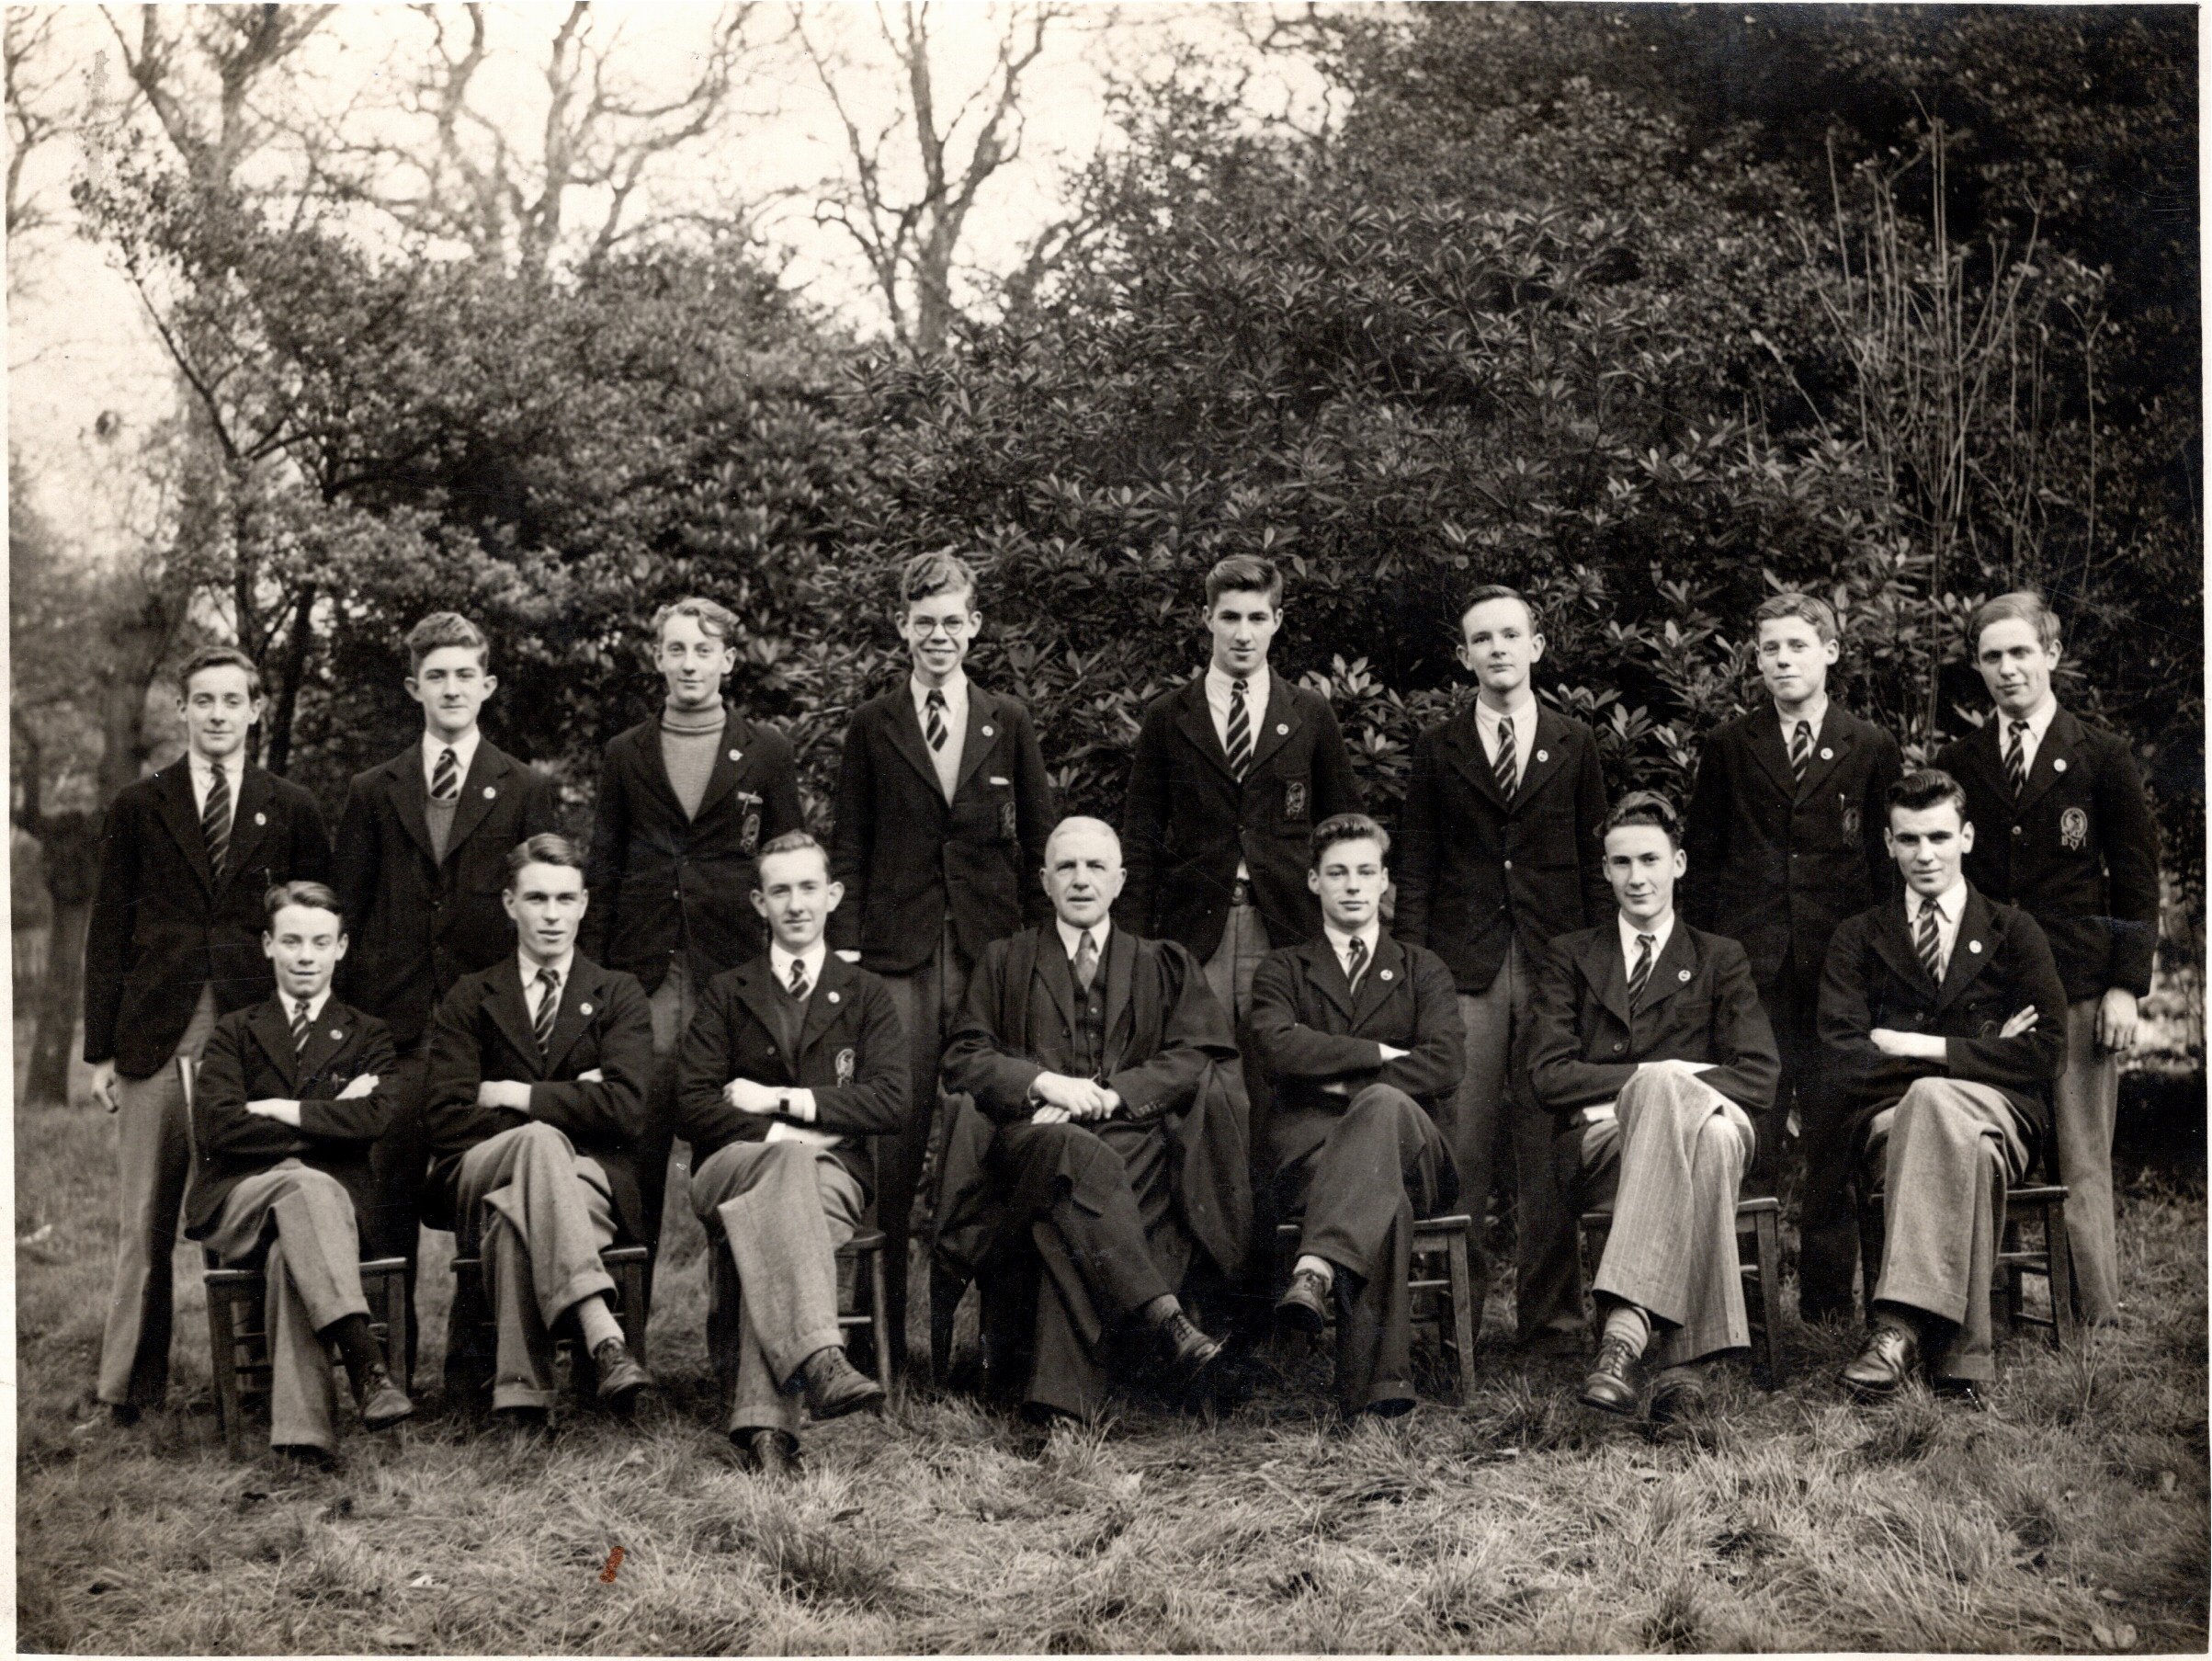 Photograph of School Prefects 1945/46